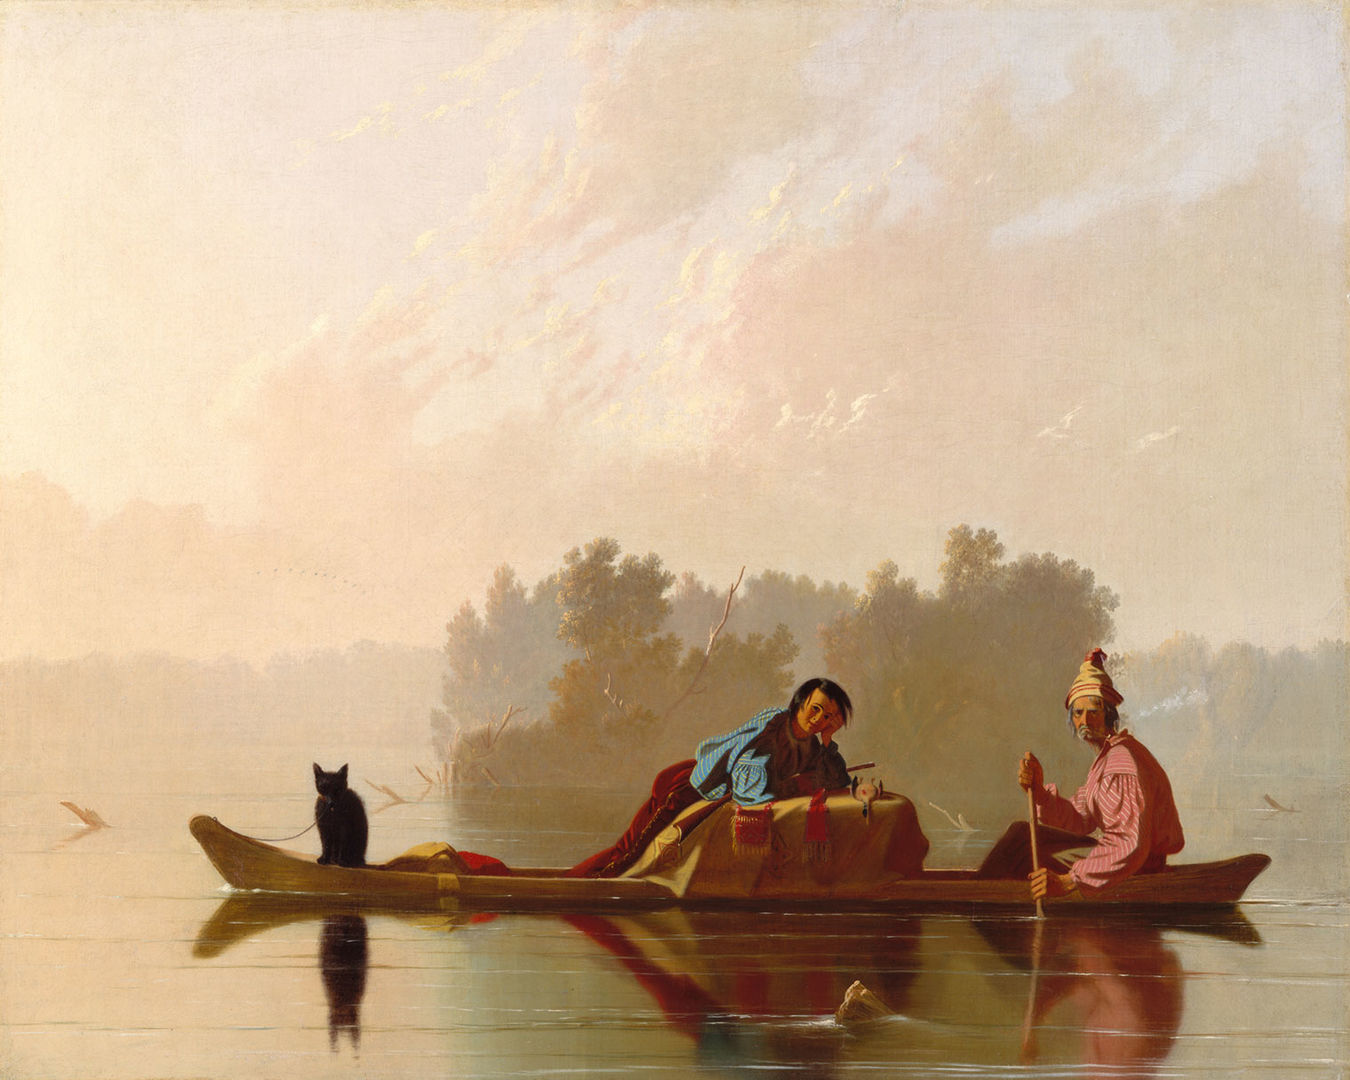 A painting of two figures rowing a canoe through an early morning landscape